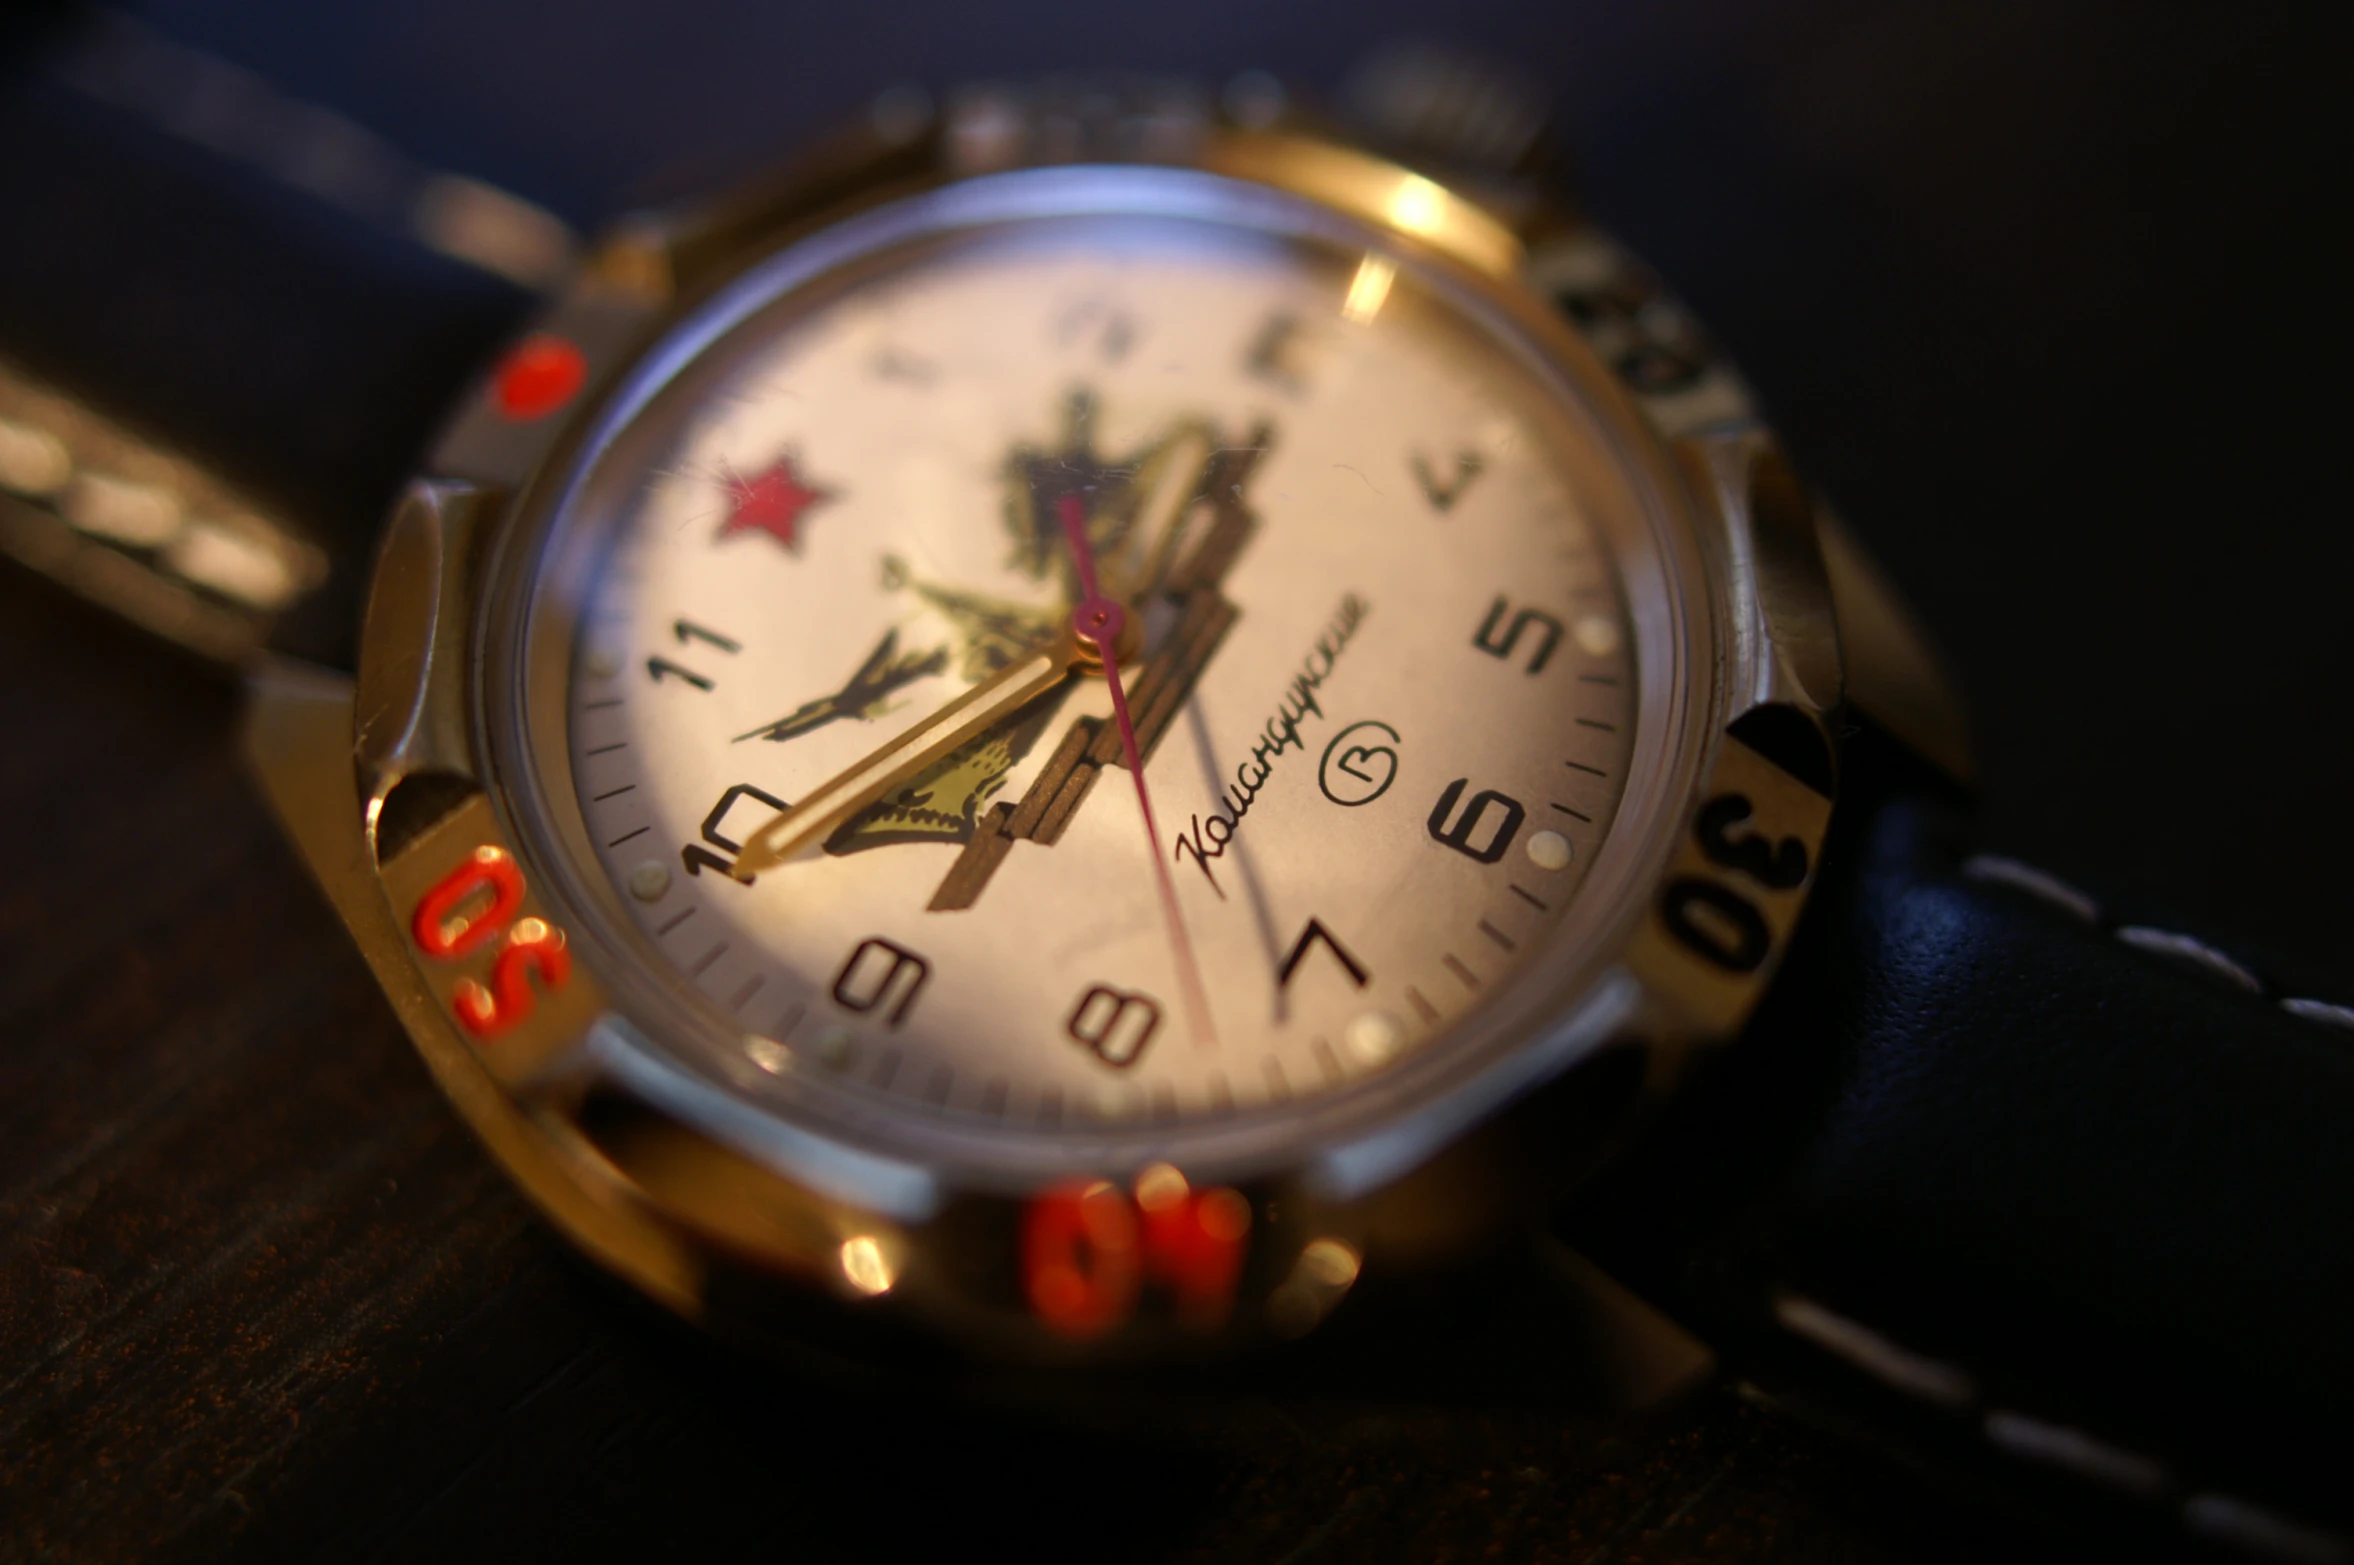 the white timepiece is displayed on the wrist watch